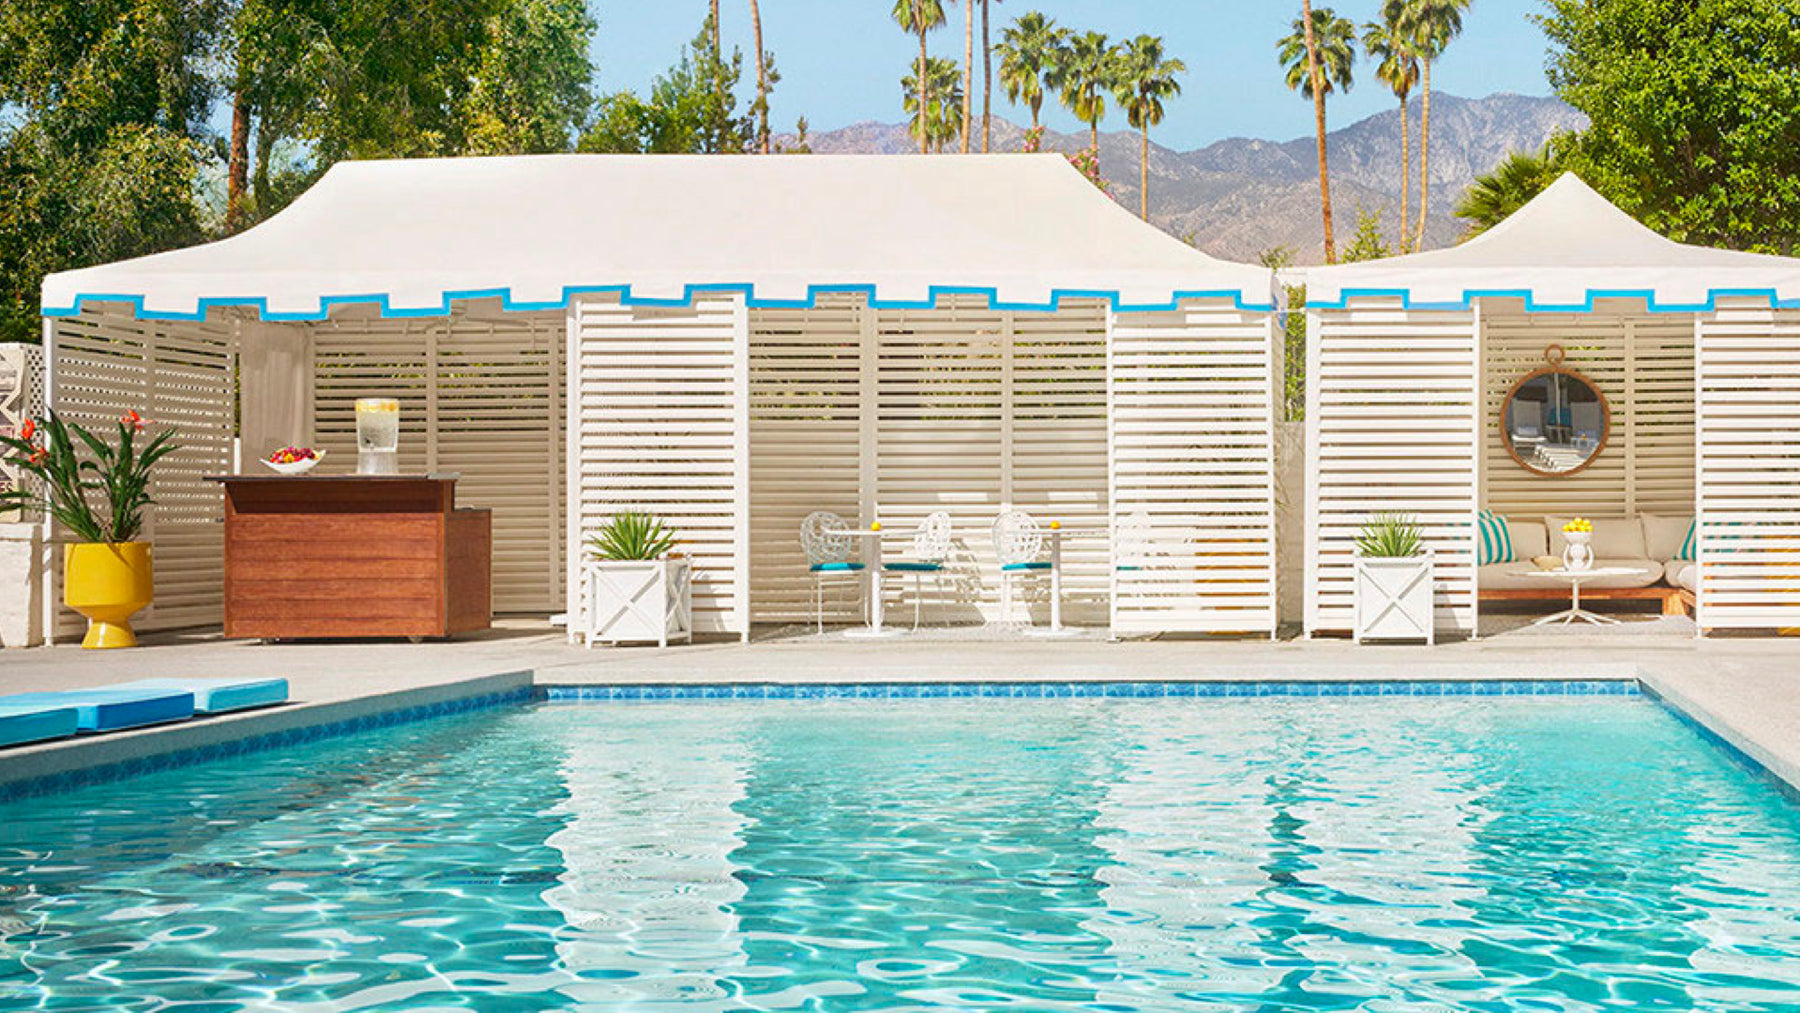 The Parker Hotel in Palm Springs features revenue-boosting poolside dining areas.